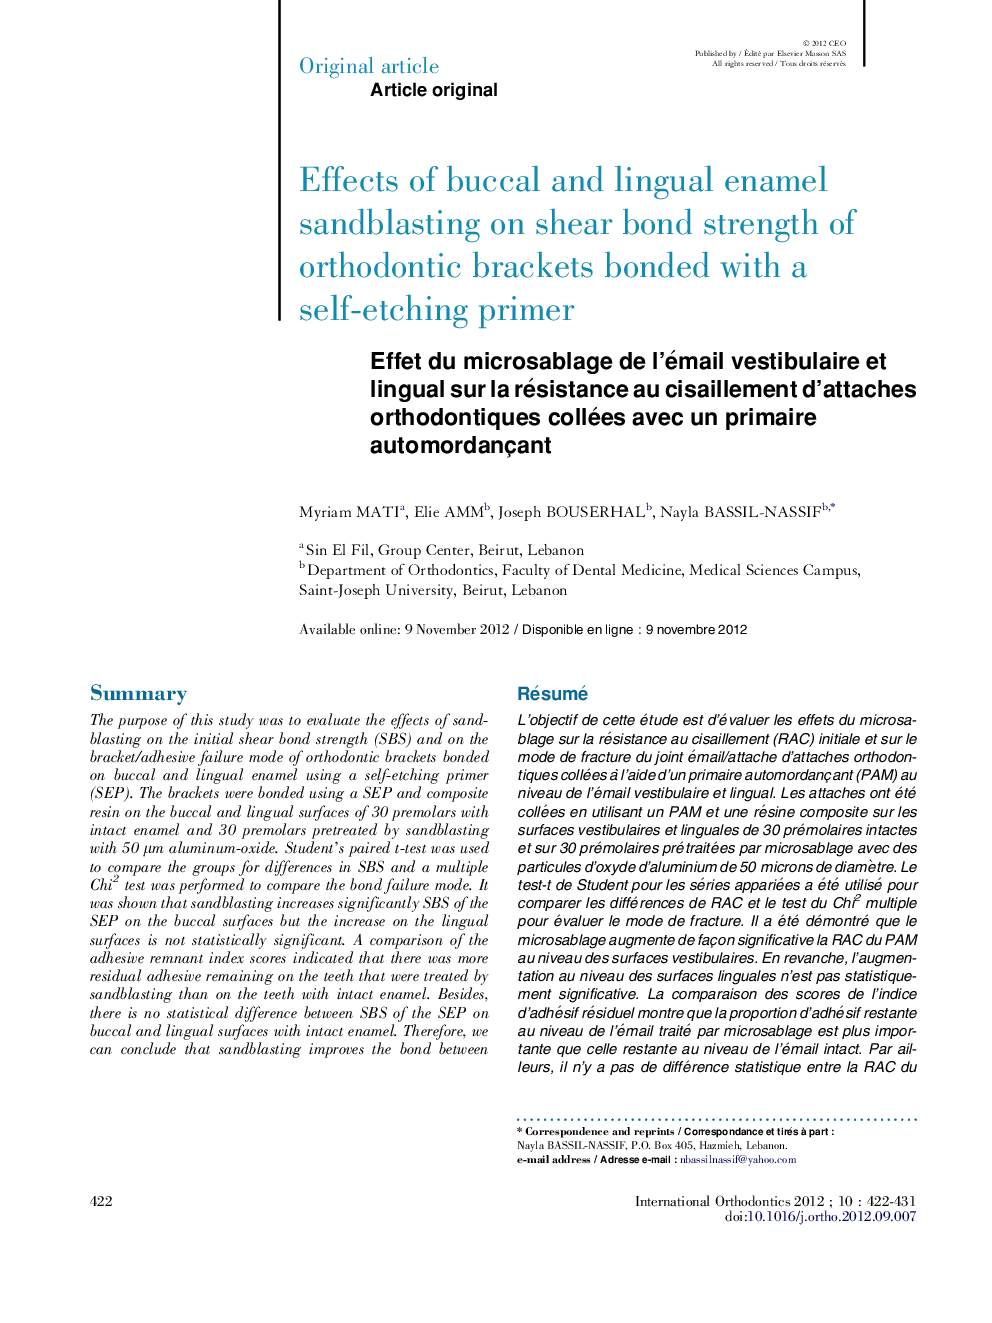 Effects of buccal and lingual enamel sandblasting on shear bond strength of orthodontic brackets bonded with a self-etching primer